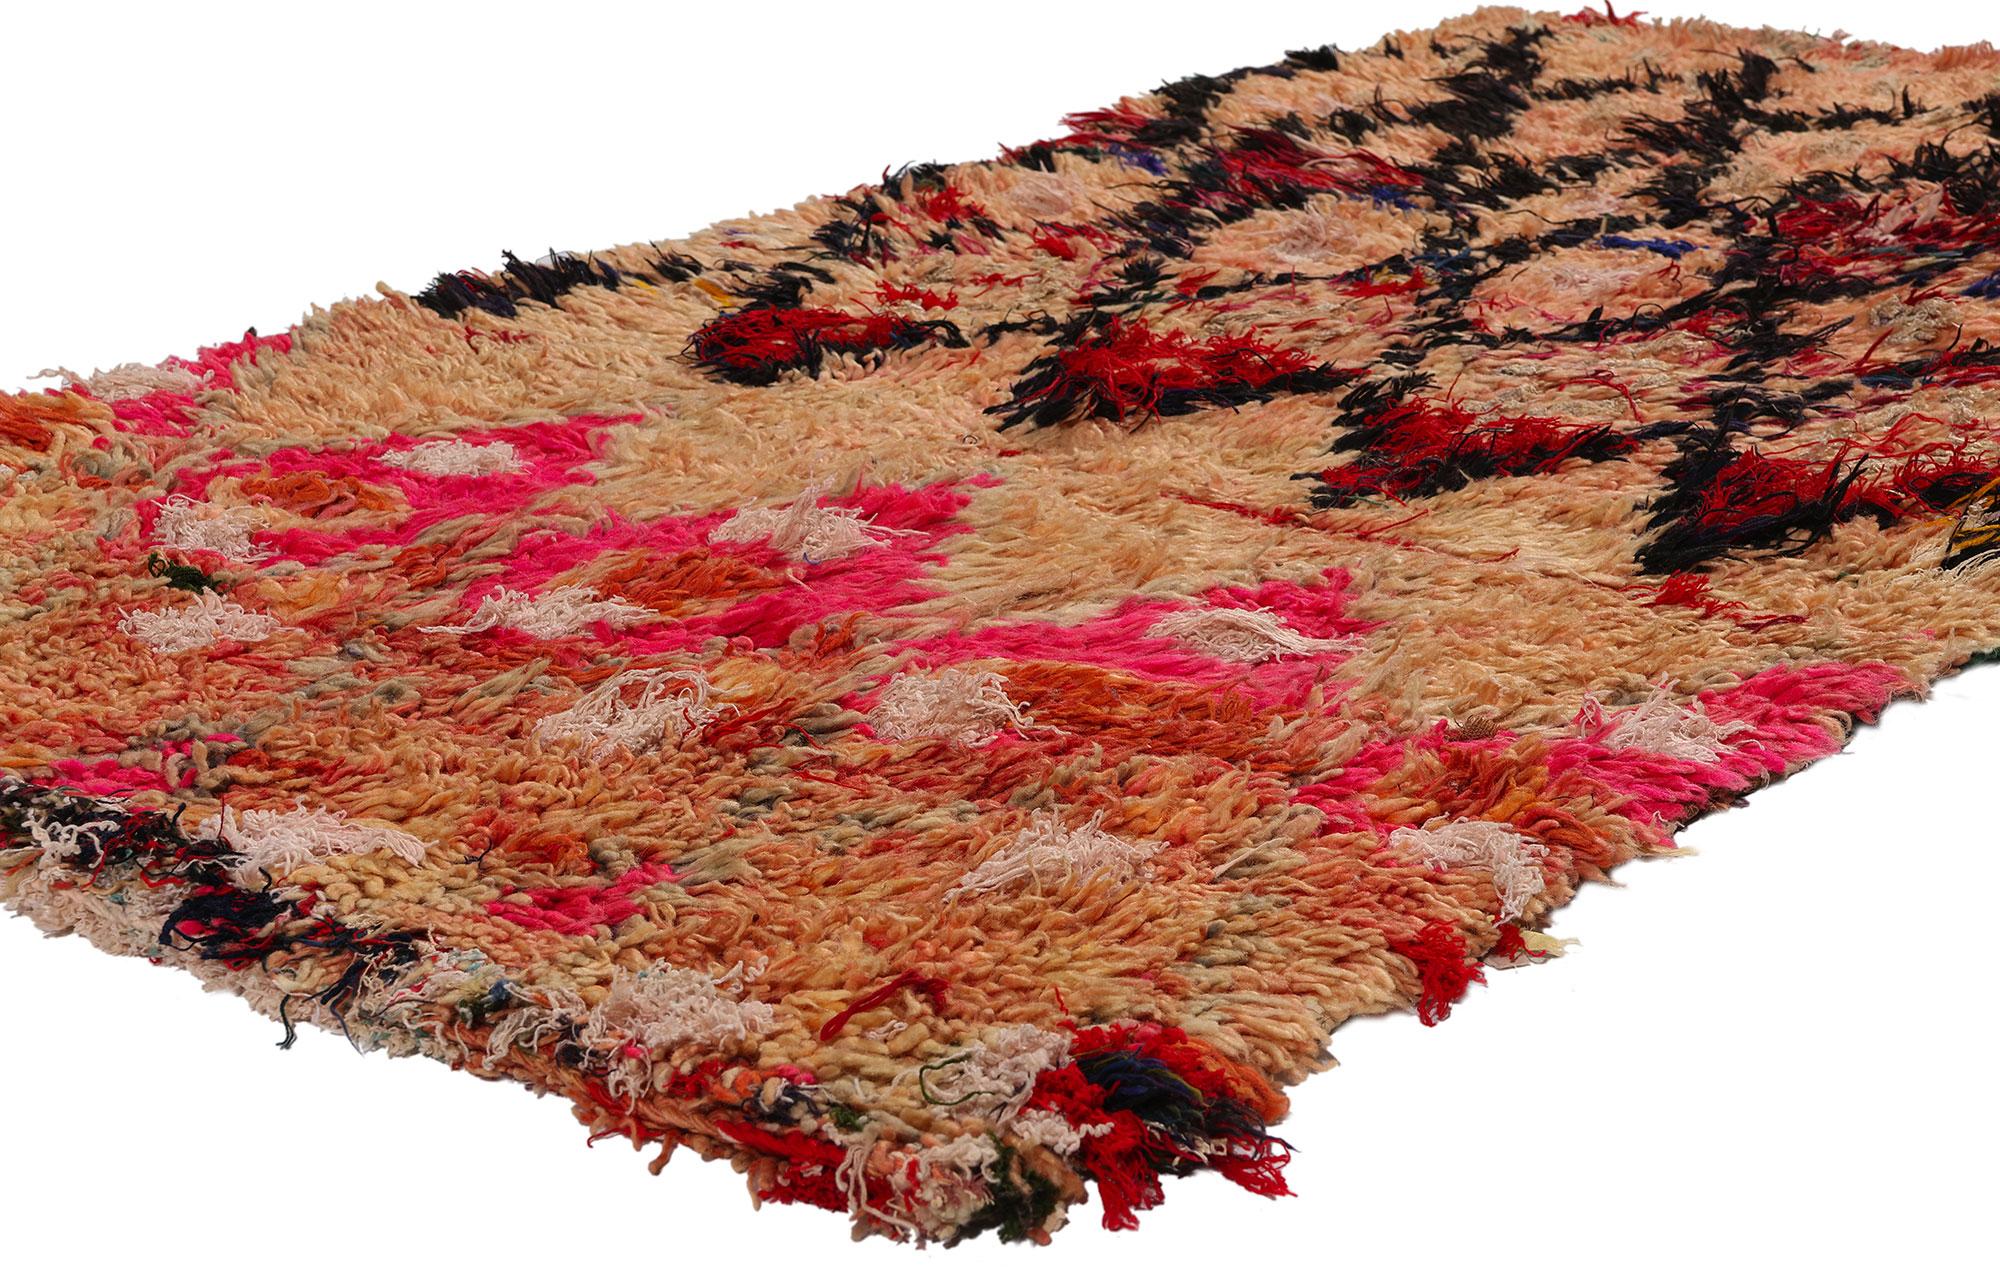 21784 Vintage Moroccan Azilal Rag Rug, 03'03 x 06'06. Azilal rag rugs, also known as Azilal Boucherouite rugs, exemplify sustainable craftsmanship originating from the Azilal region in the Atlas Mountains of Morocco. Handcrafted by Berber artisans